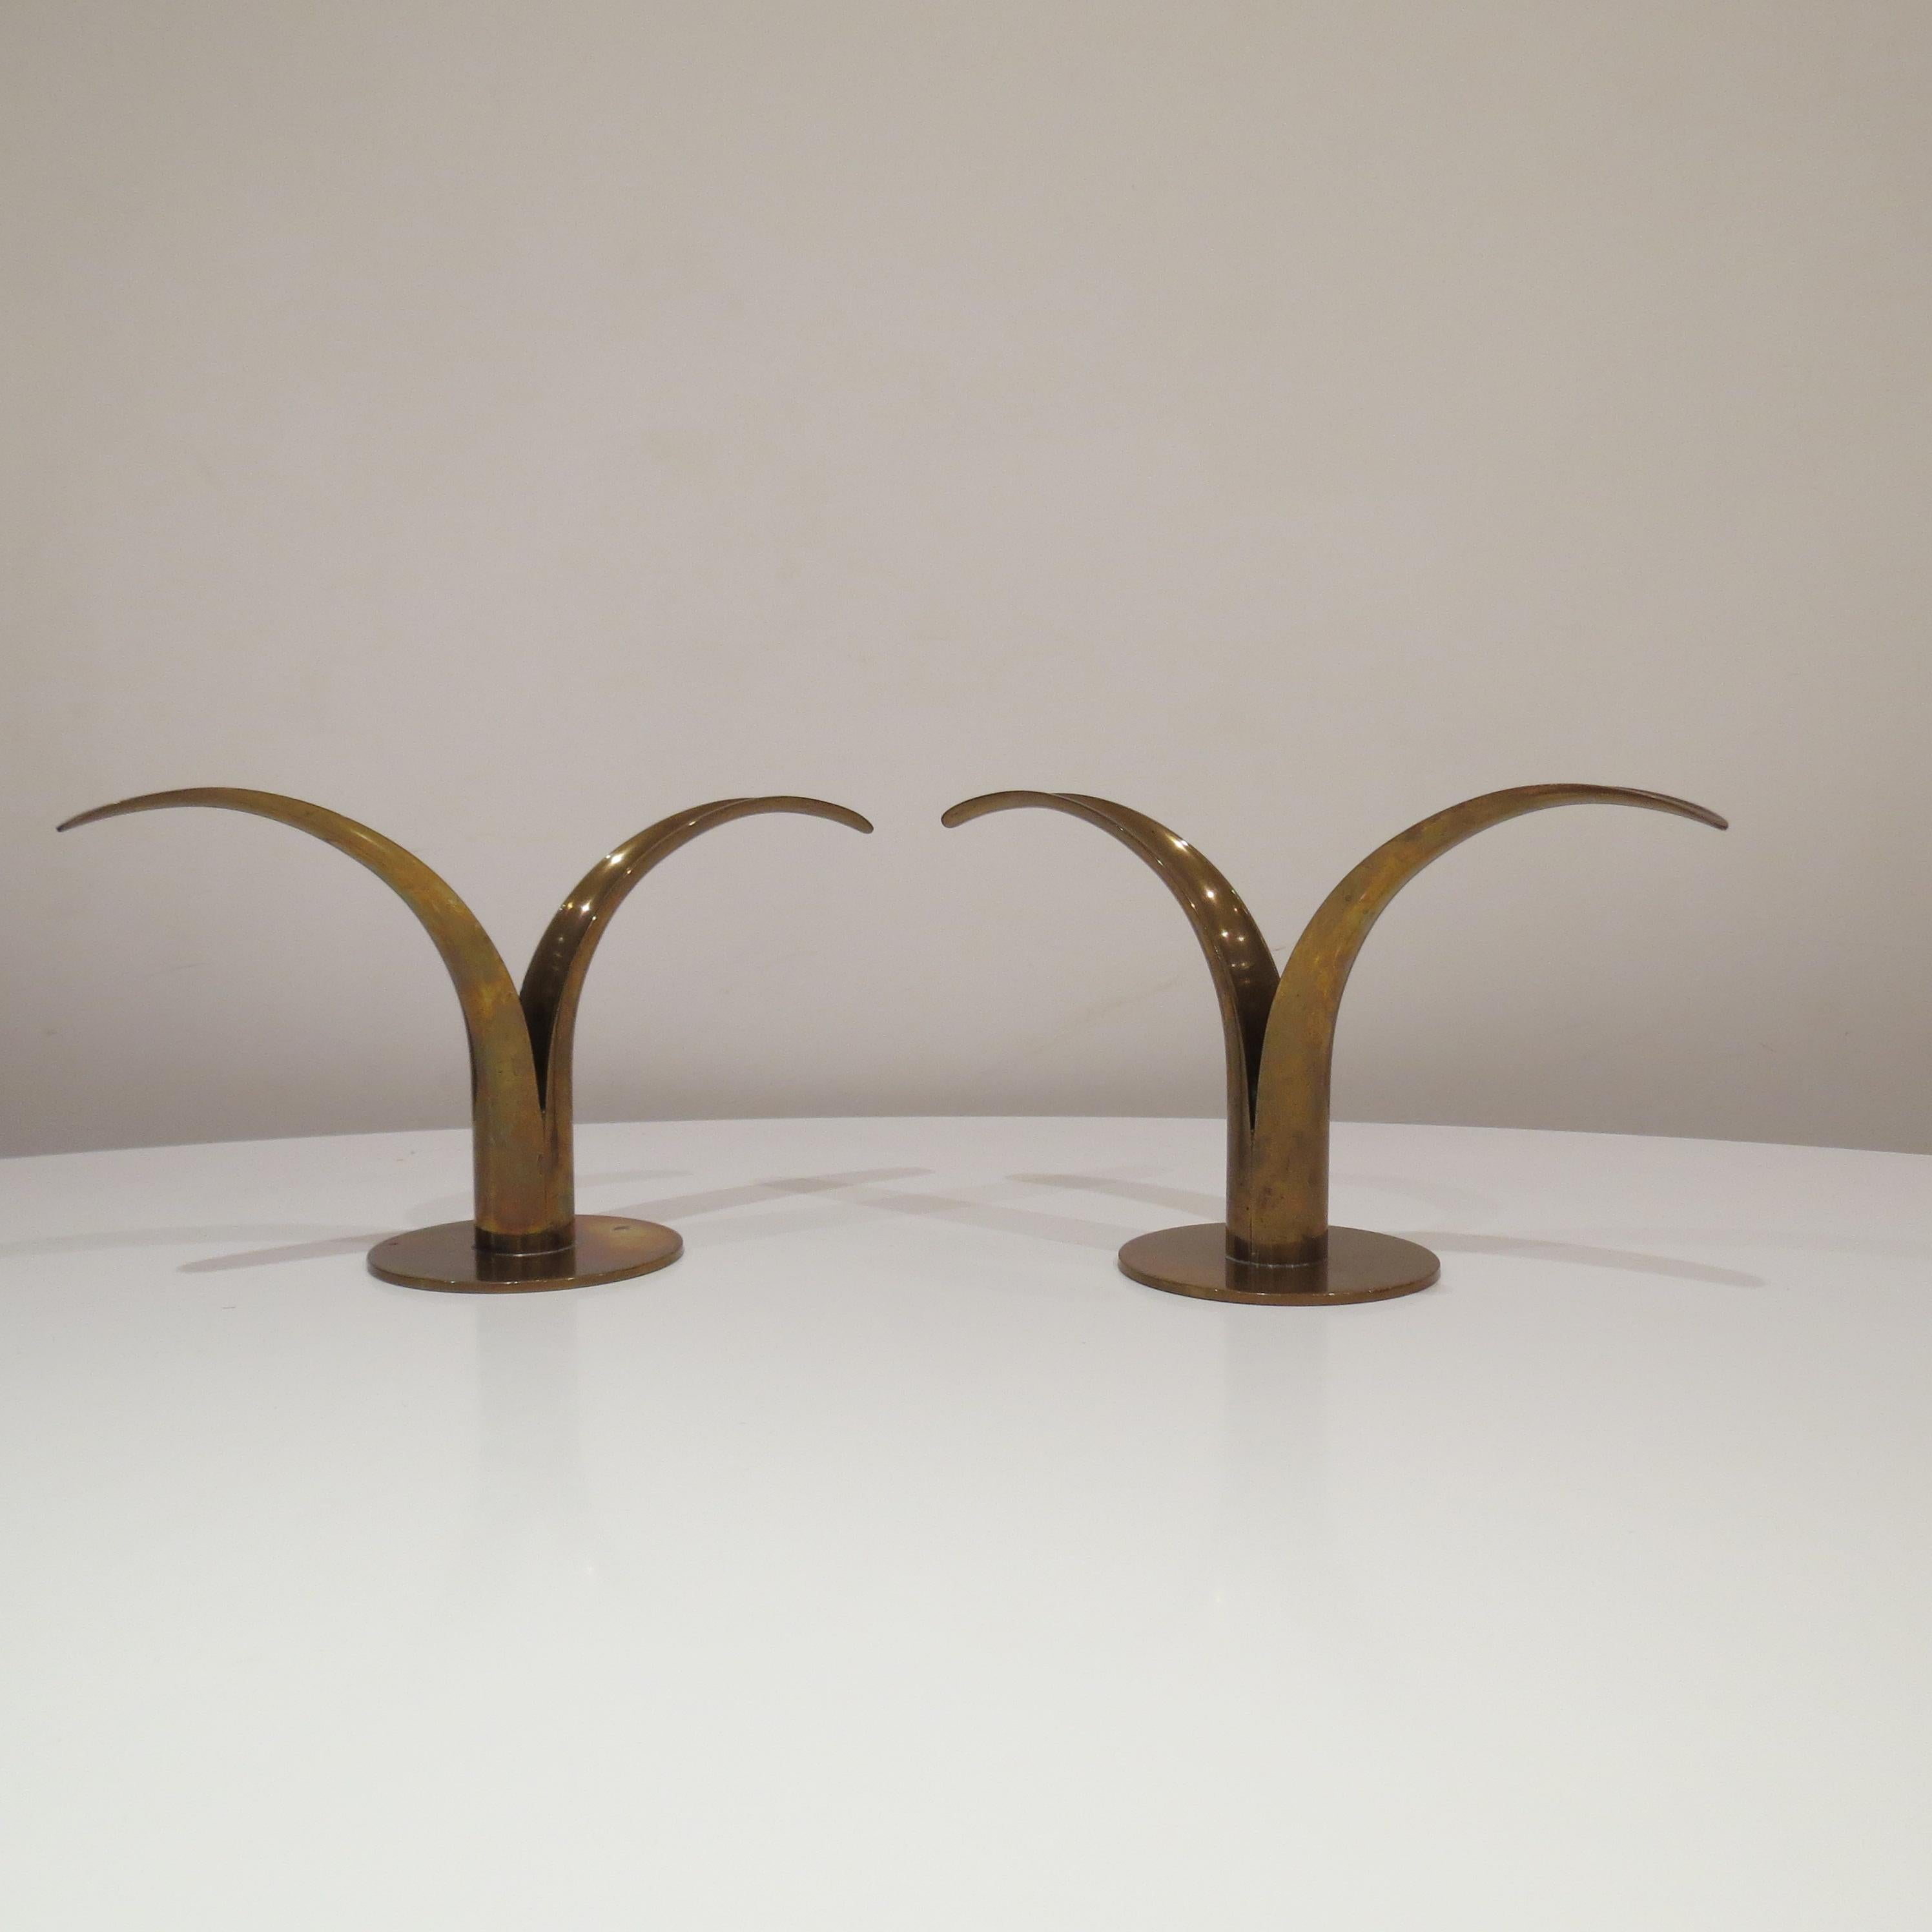 Swedish Lily Candleholders by Ivar Alenius Bjork for Ystad-Metall, 1960s, Set of 2